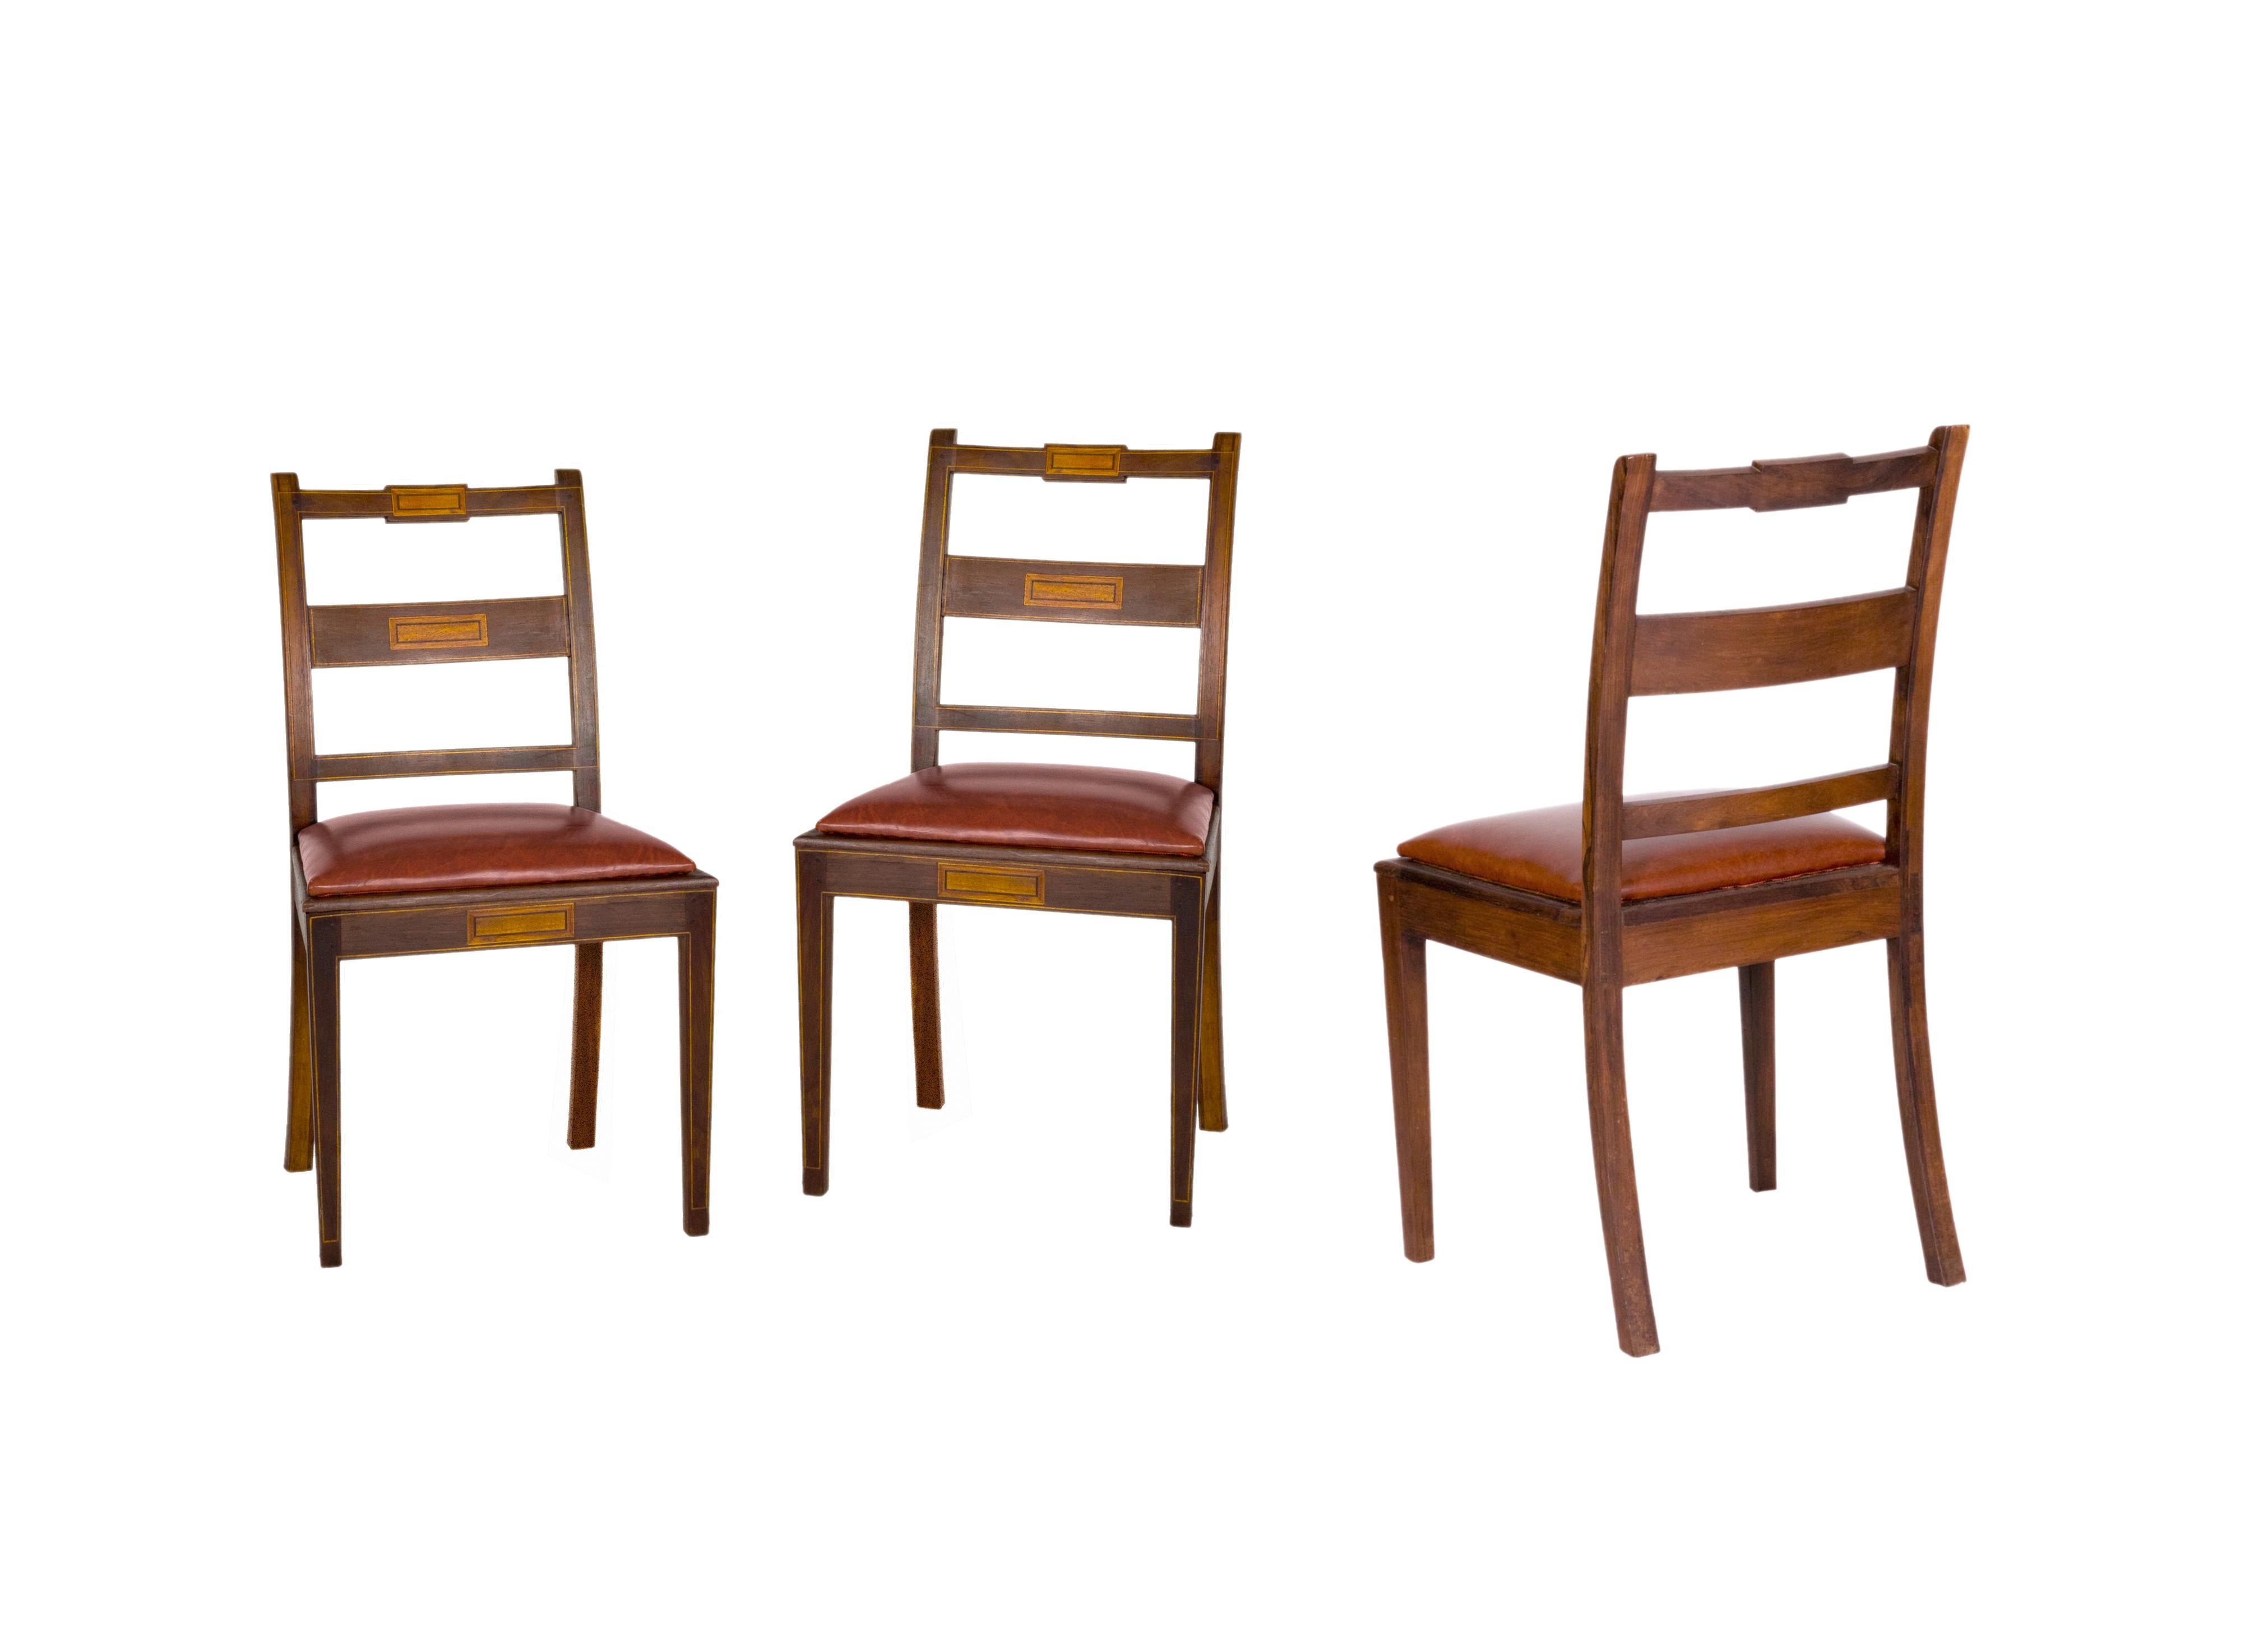 Set of Six Portuguese Chairs, Straw & Leather, 20th Century For Sale 2